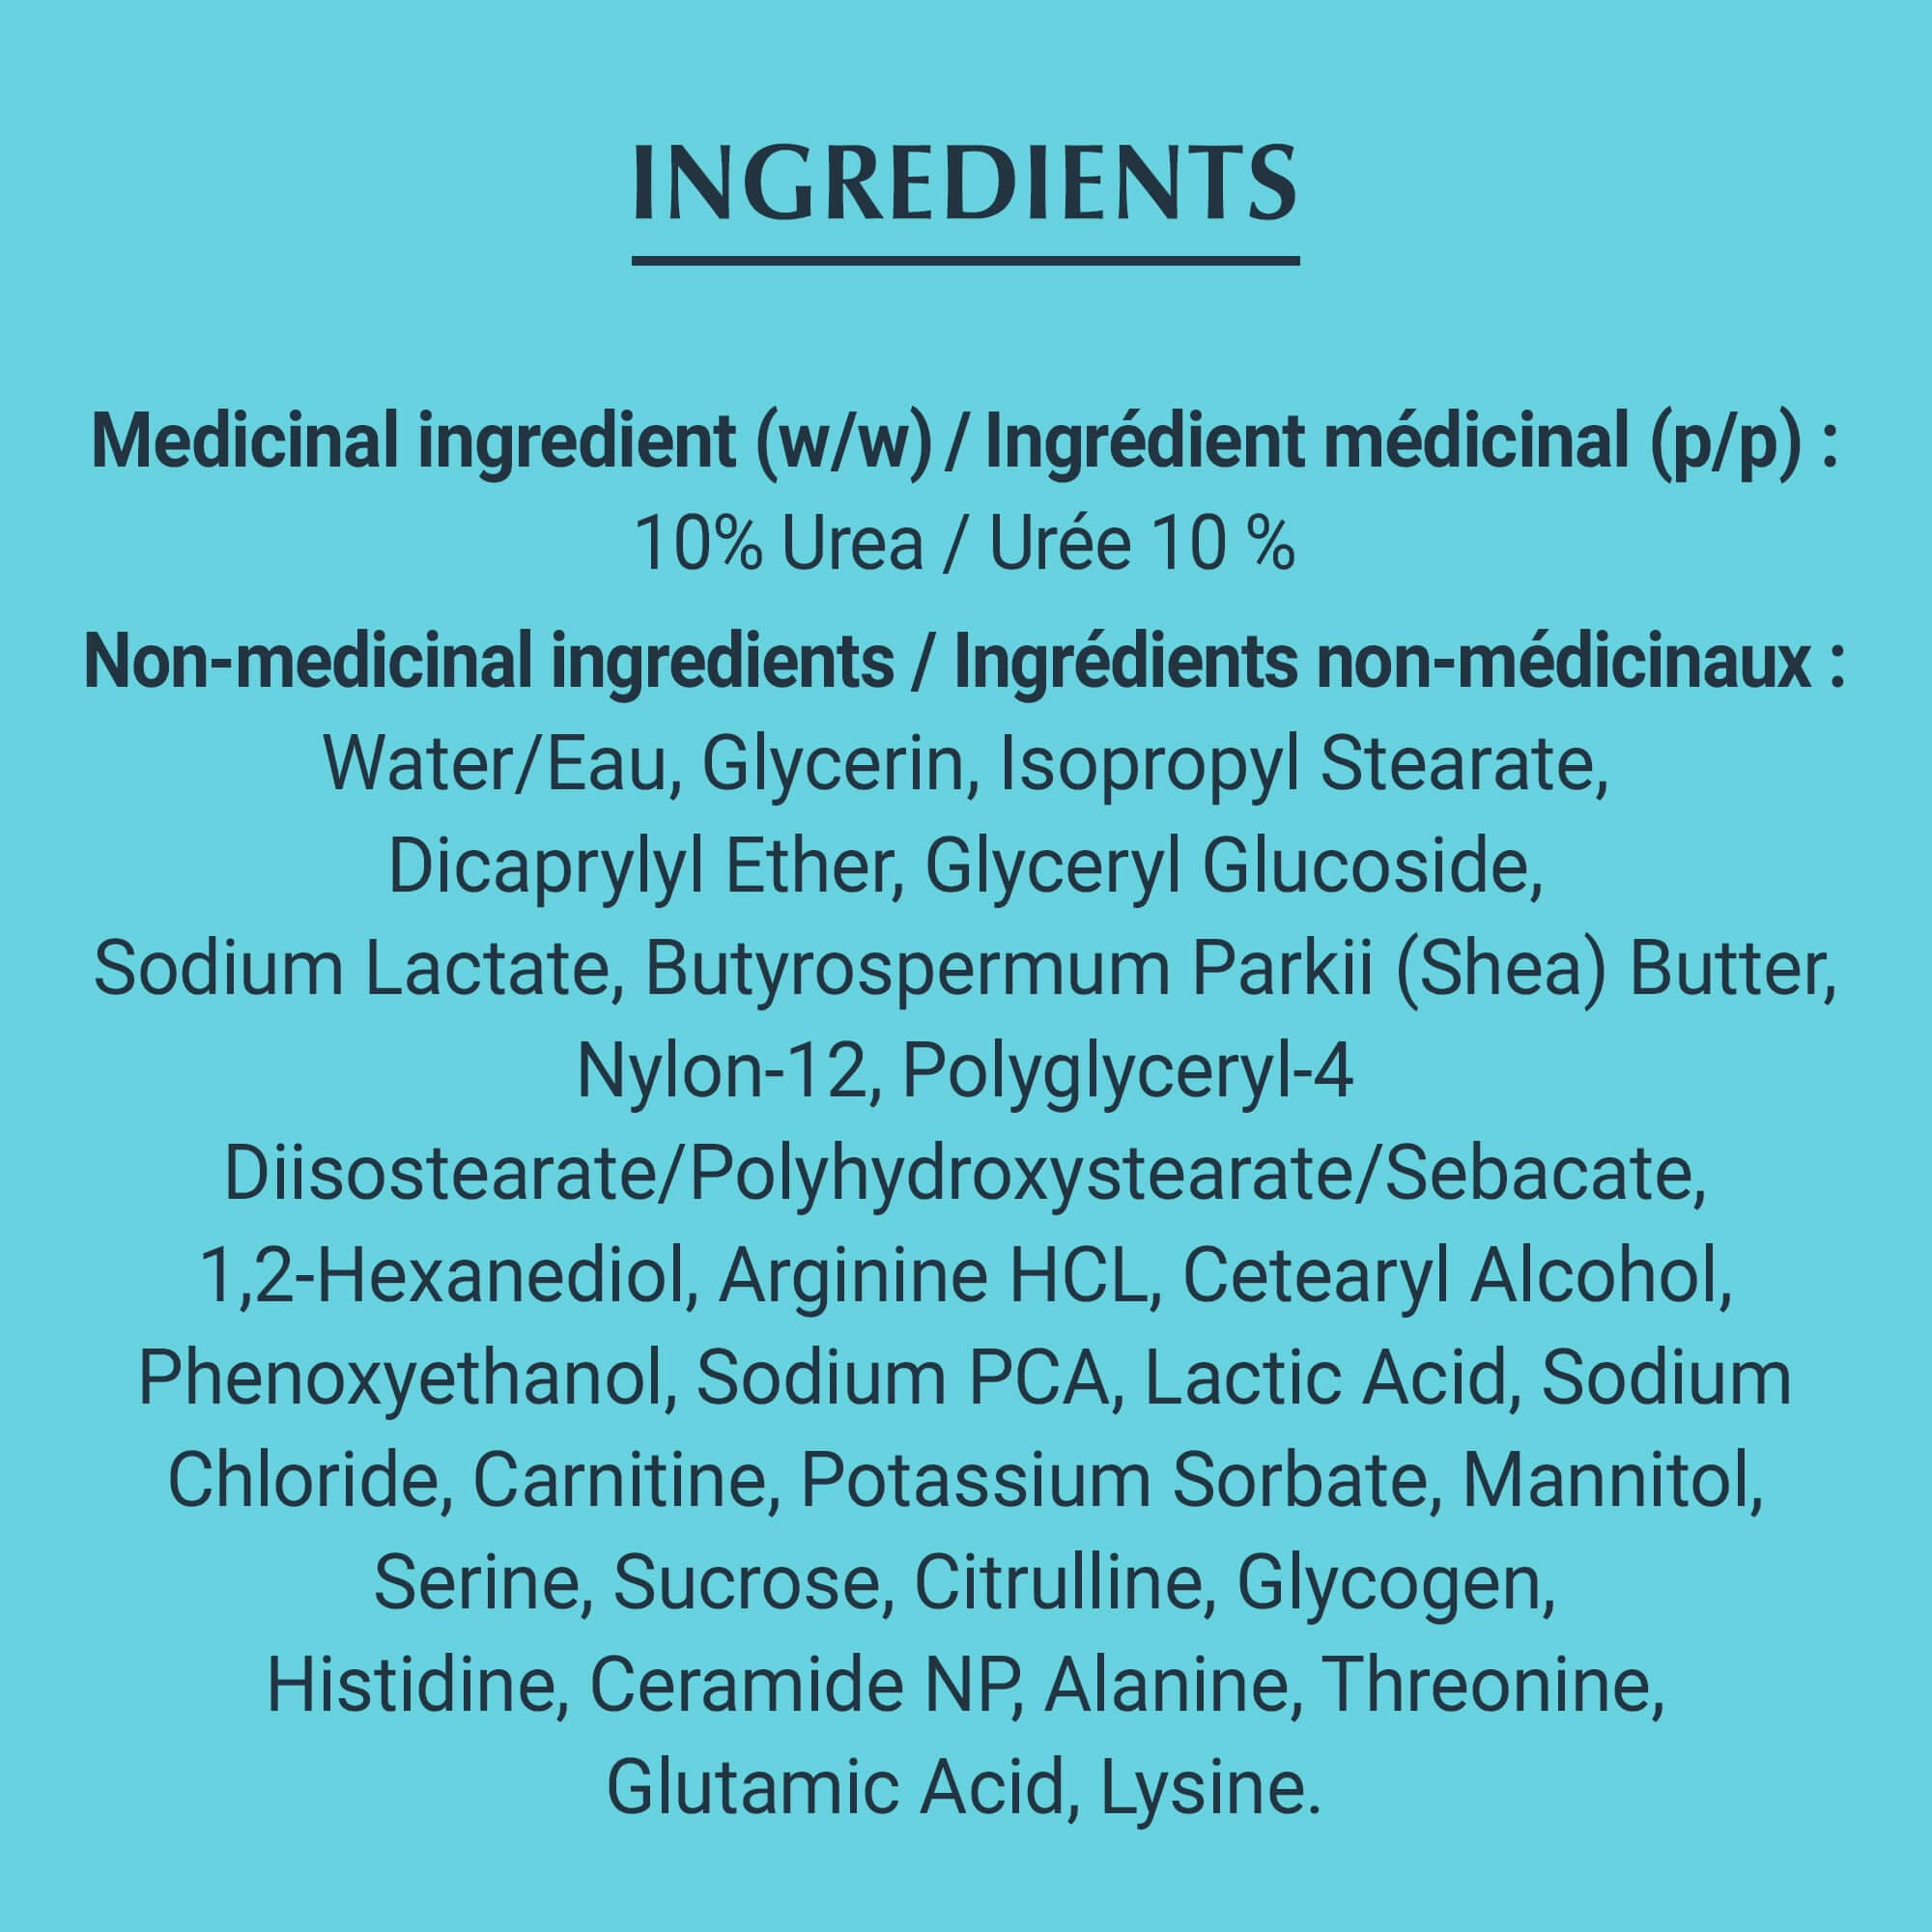 Image of The Eucerin Complete Repair Cream Ingredients list on a bright teal background.